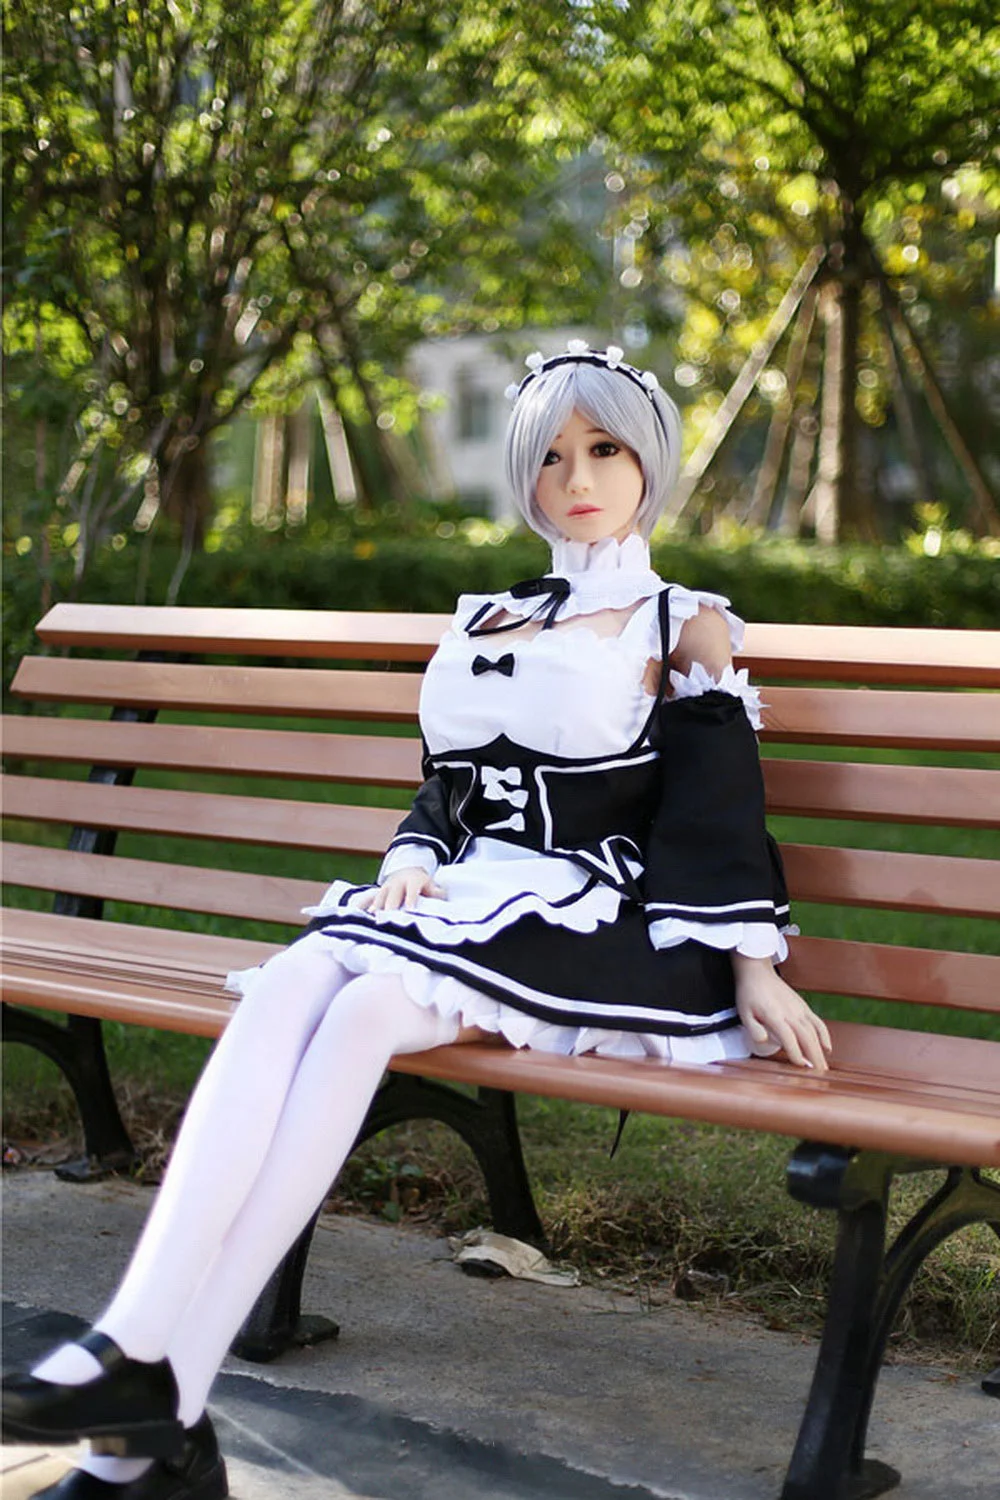 Anime sex doll sitting on a bench